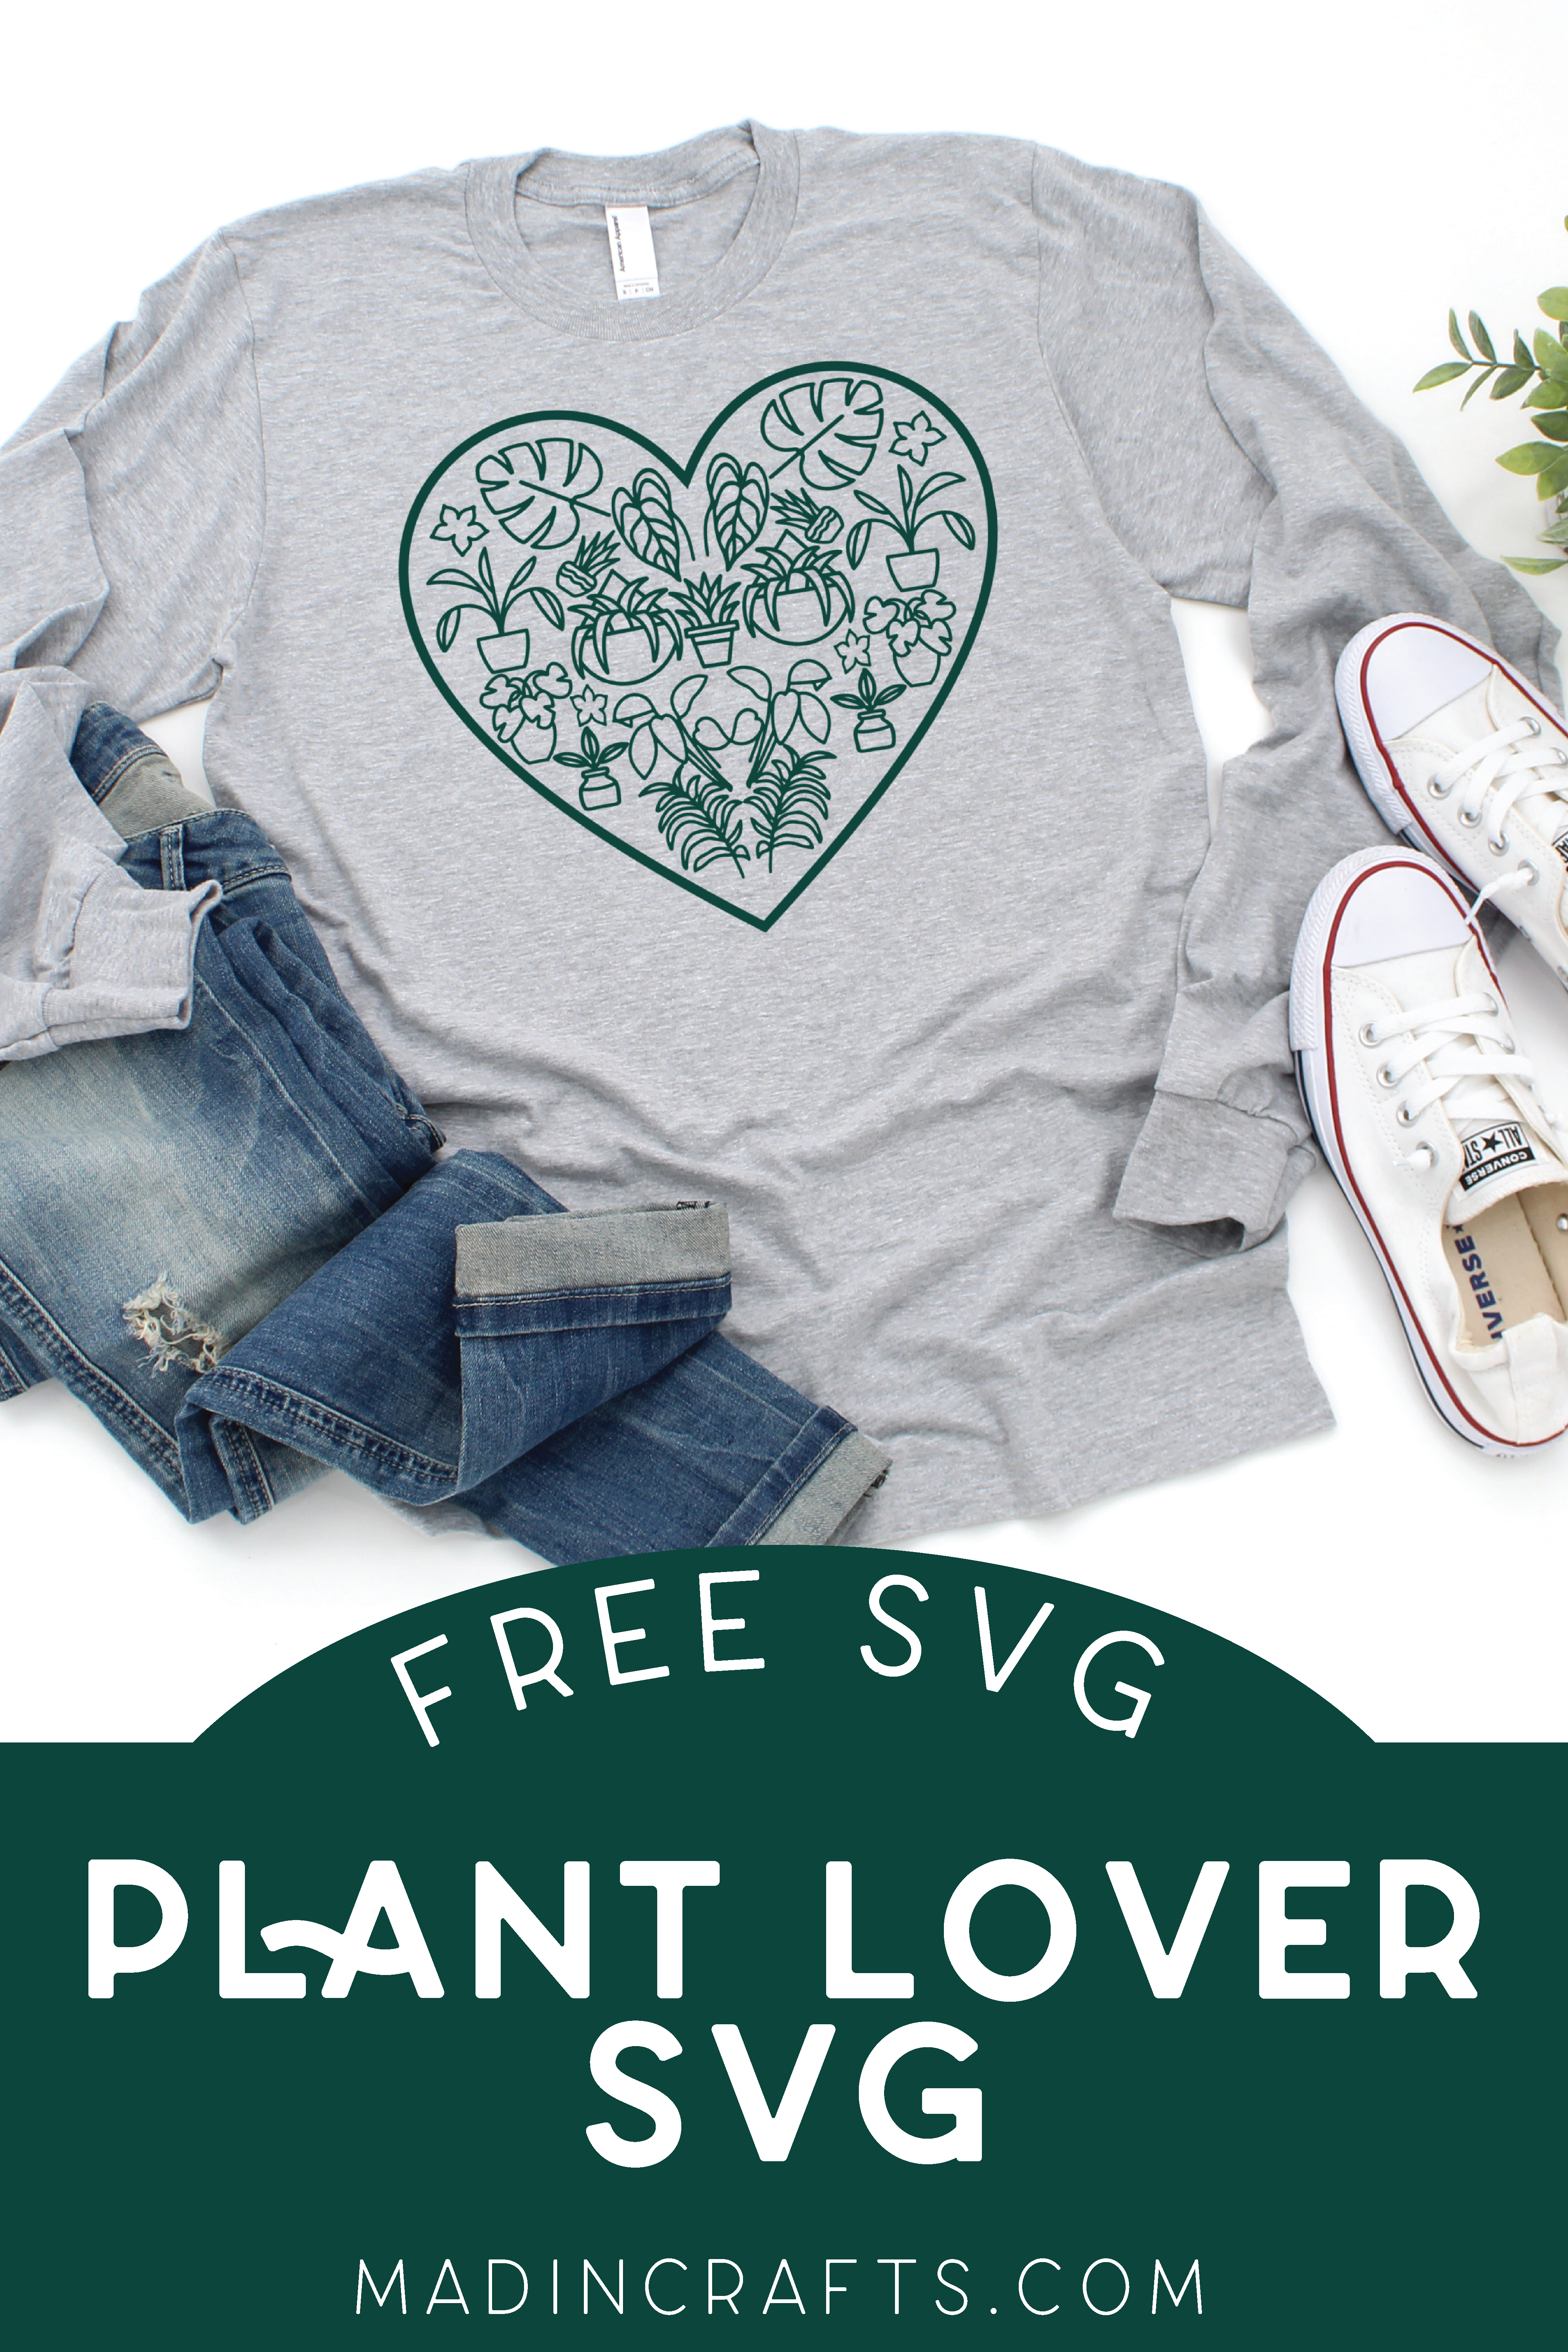 svg of a heart filled with plants